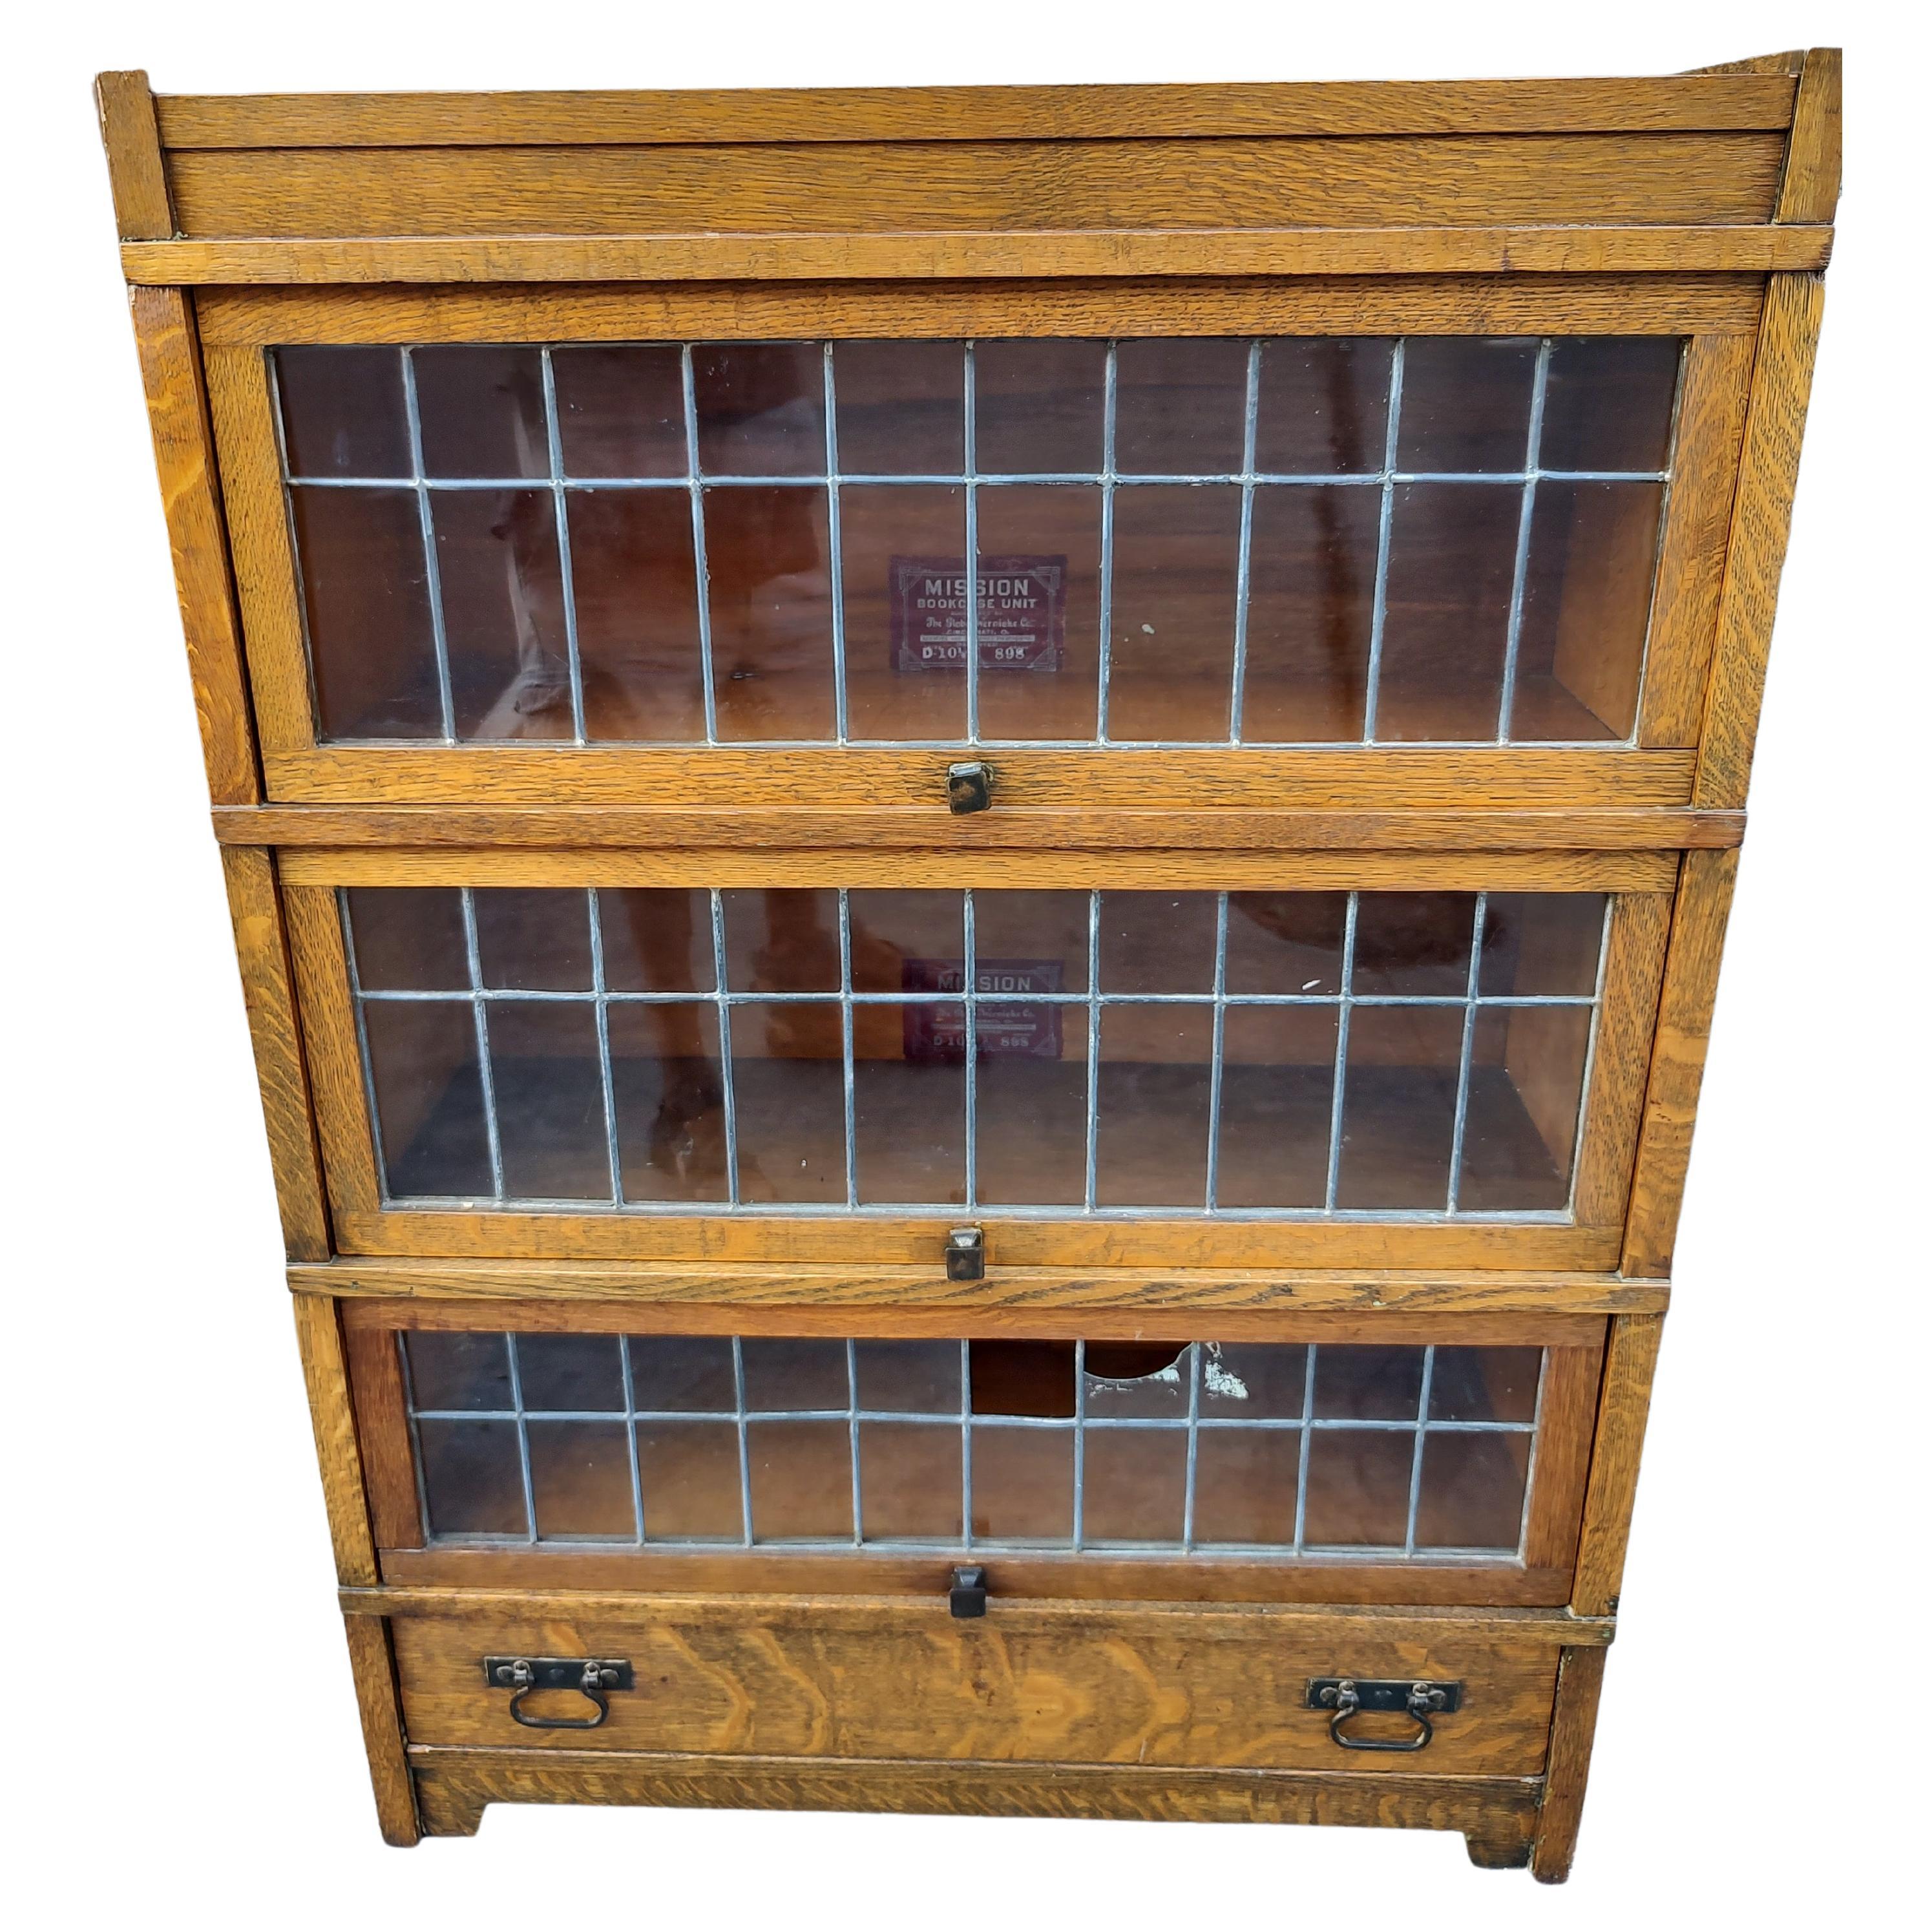 Mission Art's & Crafts 5 Section Leaded Door Bookcase by Globe Wernicke For Sale